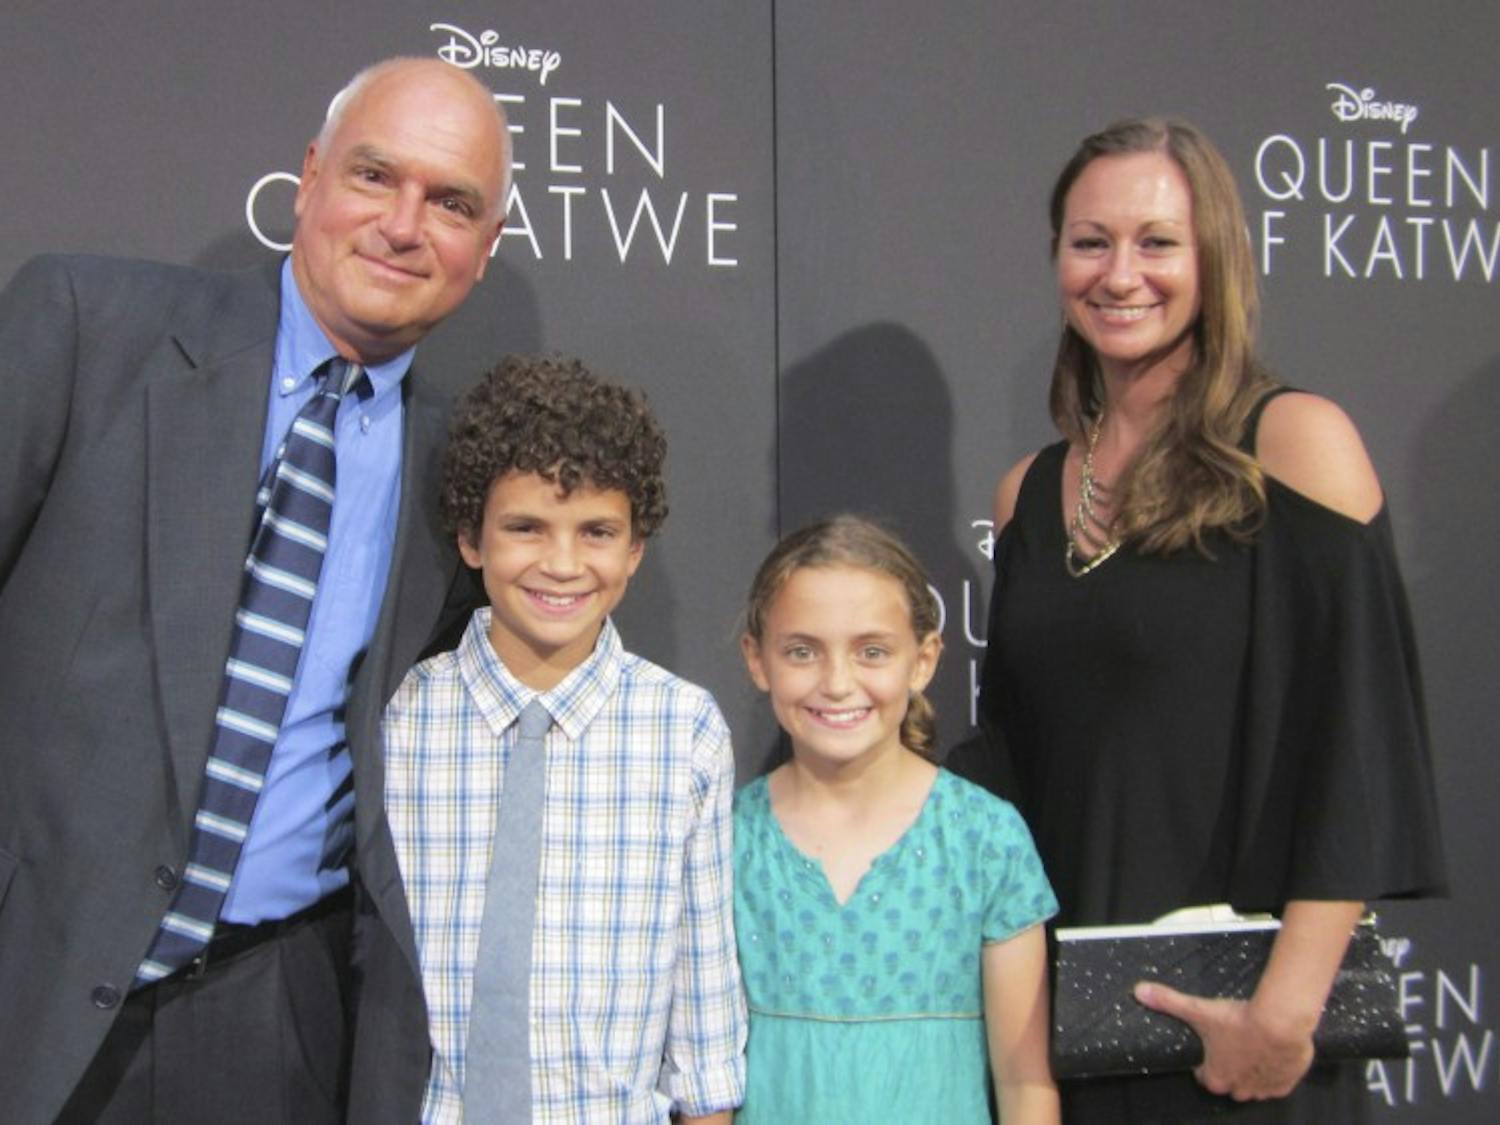 (from left)&nbsp;UNC film professor Tim Crother, his son, Atticus,&nbsp;daughter, Sawyer, and wife, Candace, pose at the premiere of the new Disney movie Queen of Katwe in Hollywood. Photo Courtesy of Tim Crother.